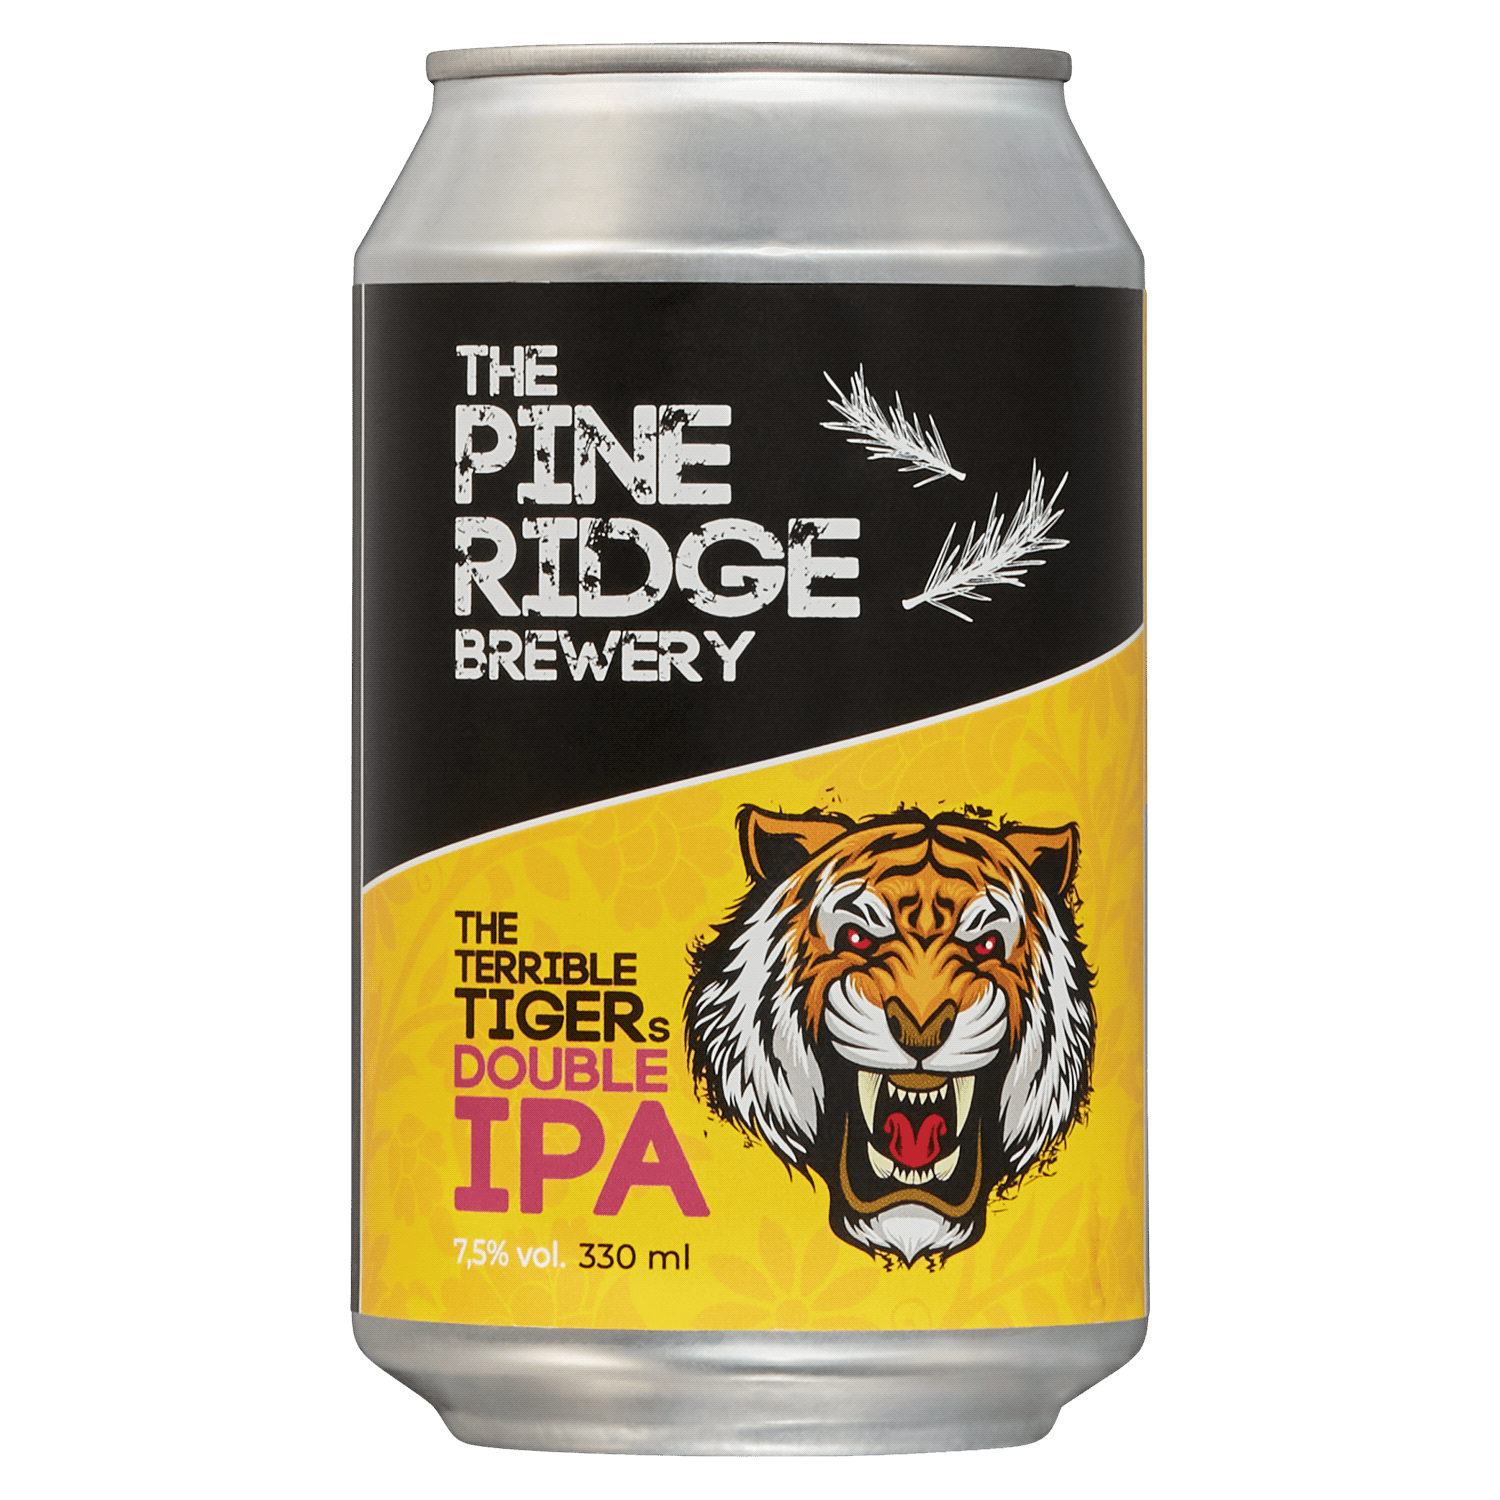 The Terrible Tigers Double IPA